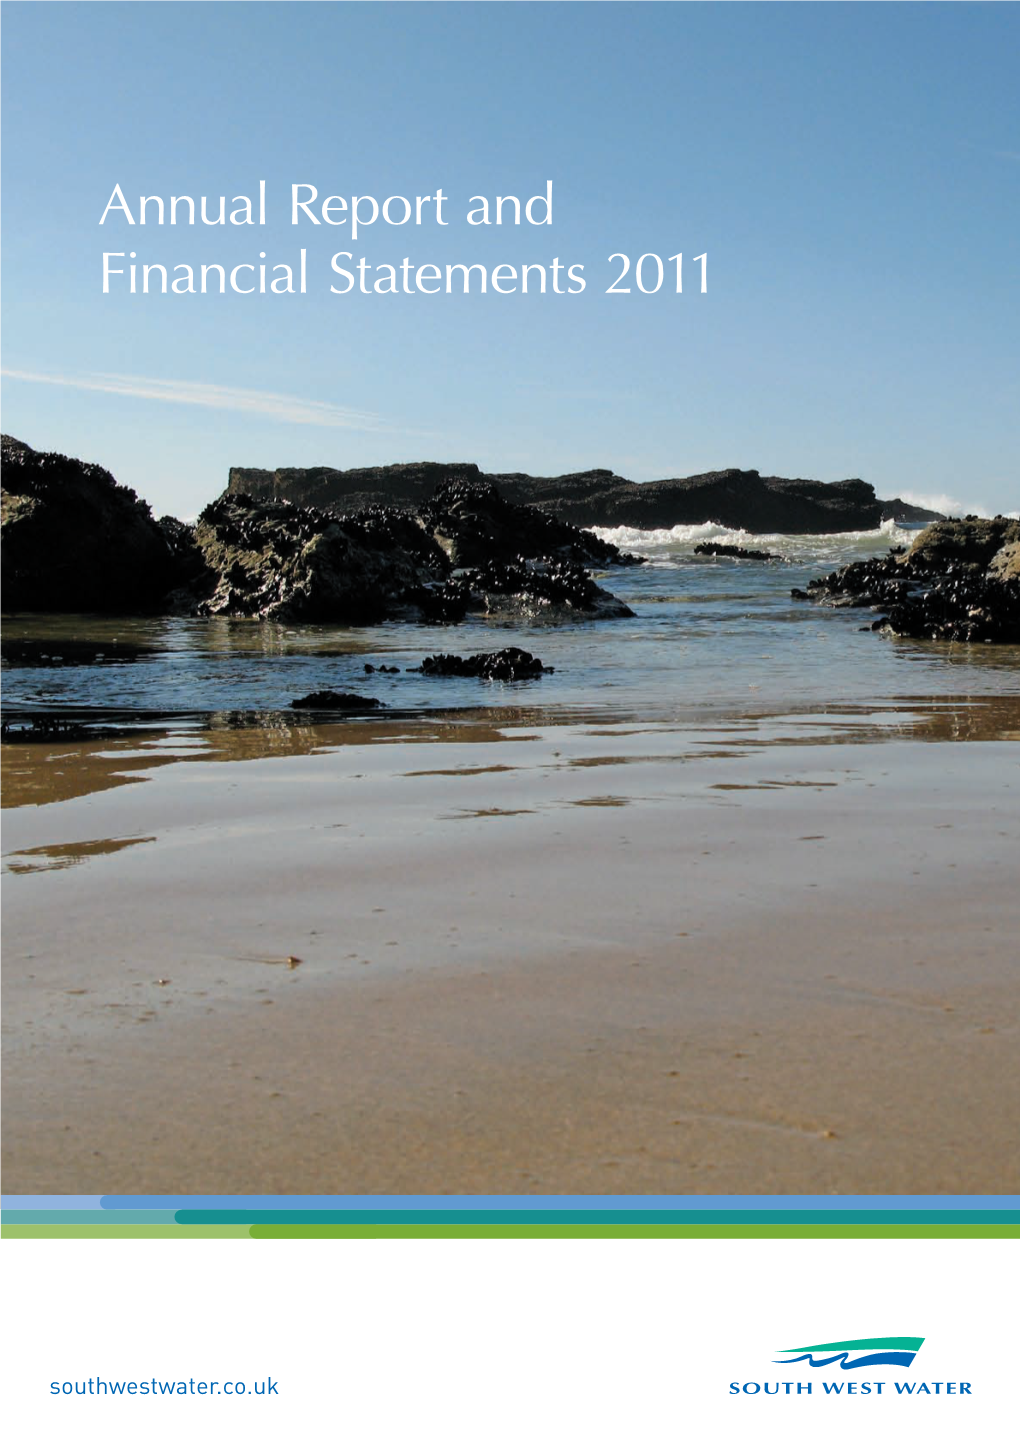 Annual Report and Financial Statements 2011